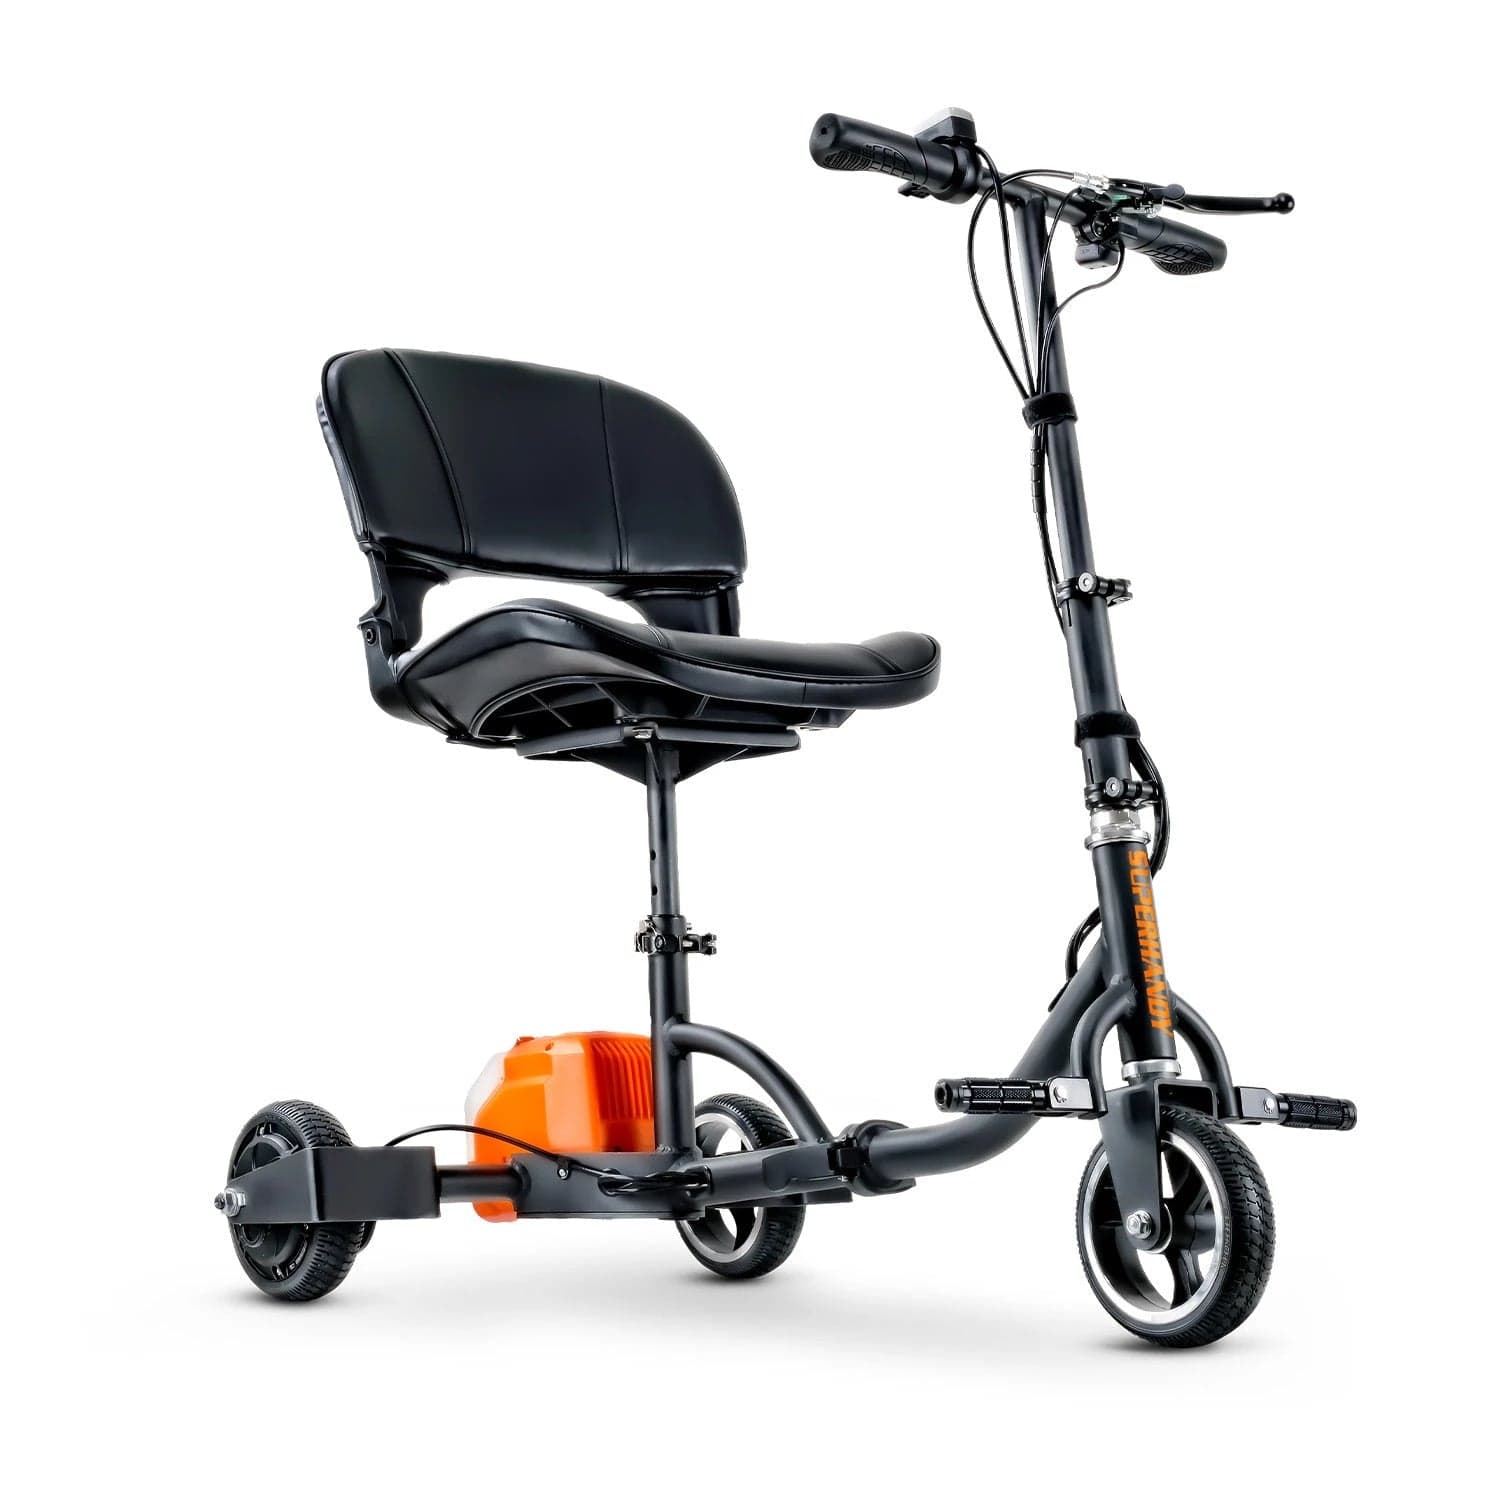 SuperHandy Mobility Scooter - The Lightest Electric Mobility Scooter -  SuperHandy - Shop Outdoor Power Equipment & Mobility